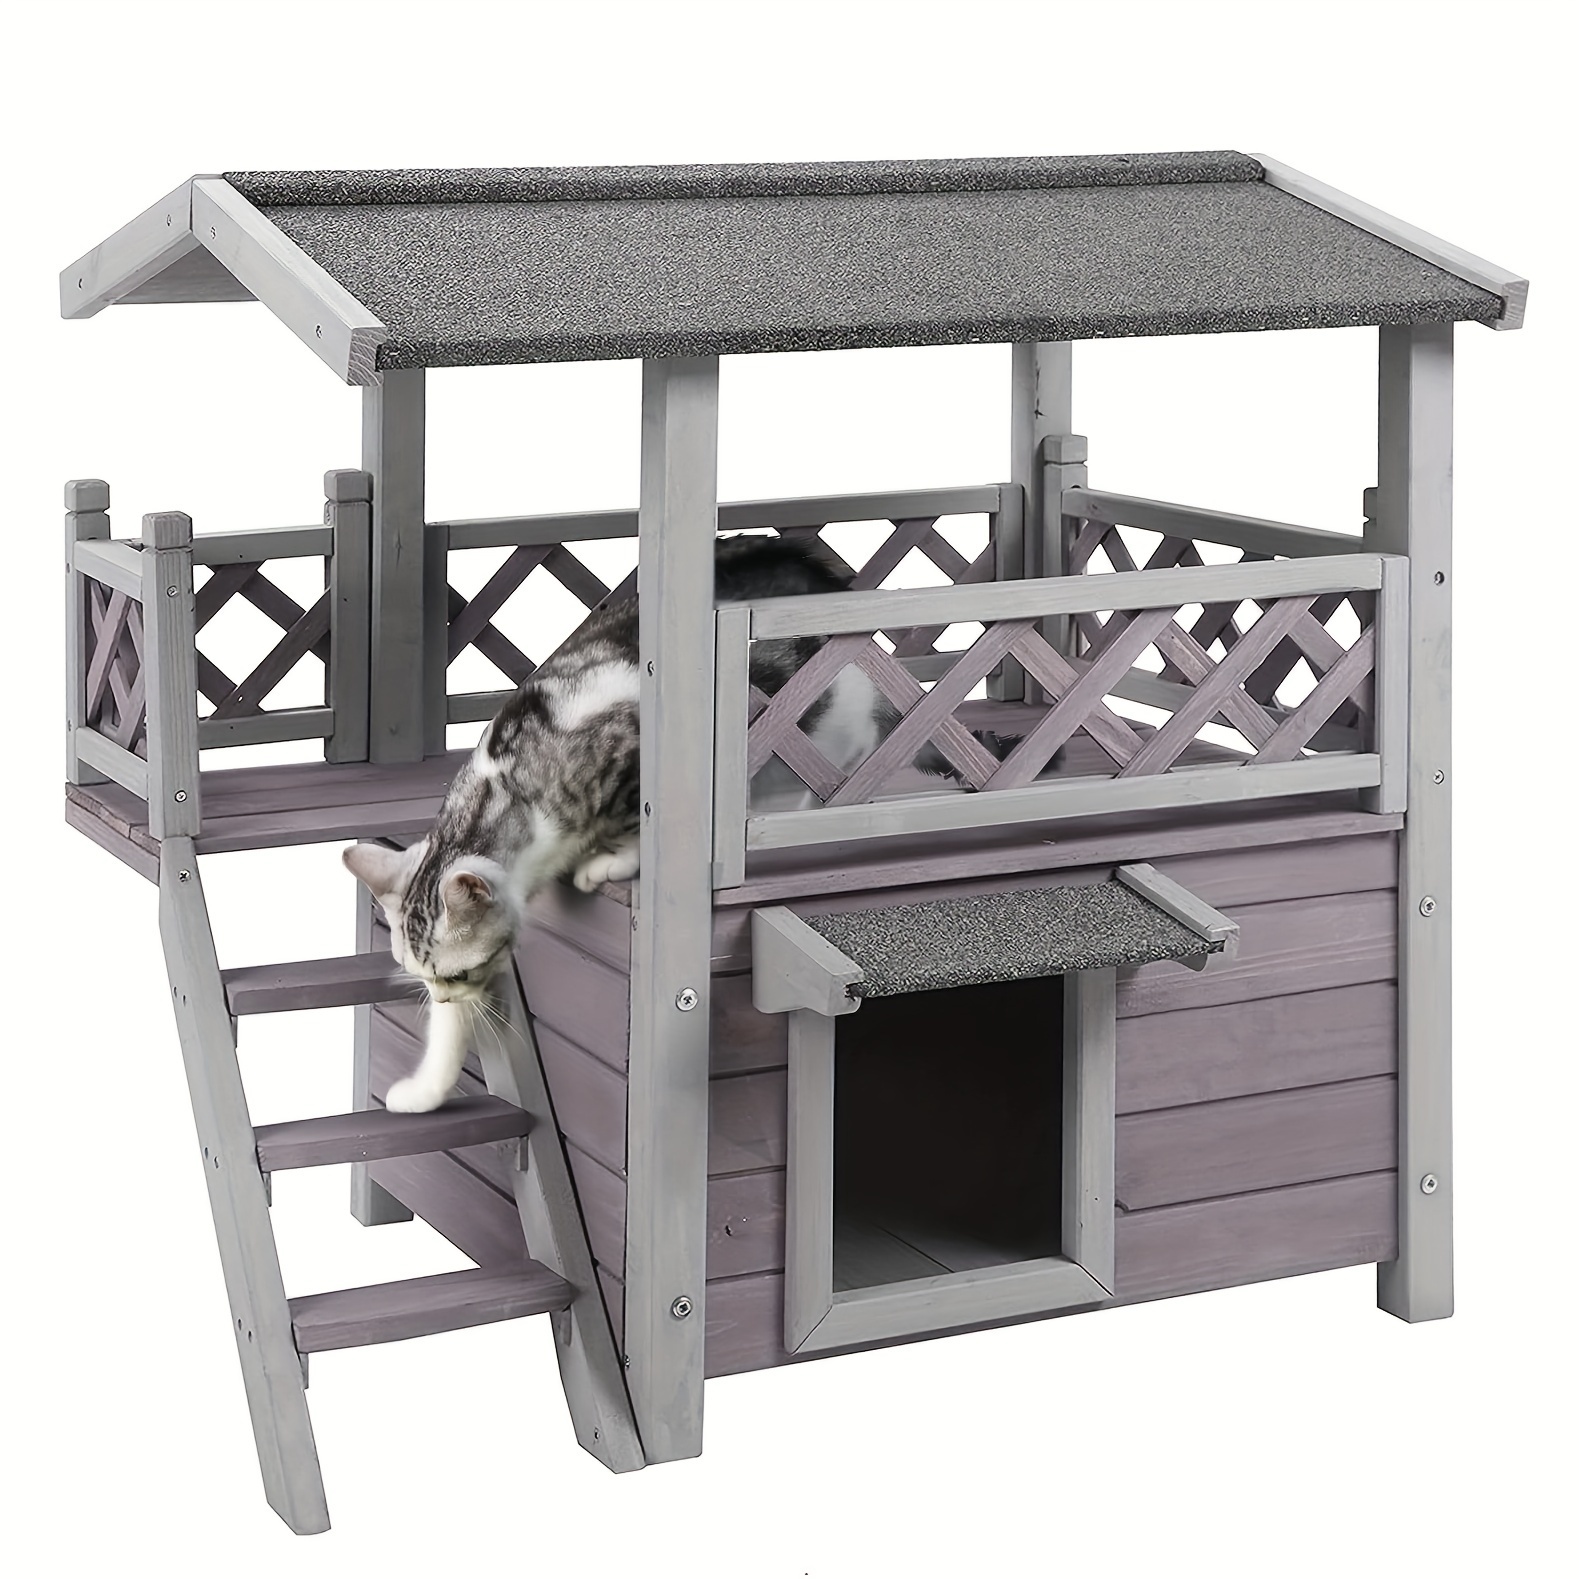 

Aivituvin Cat House With Door For Feral Cats, 2 Story Wooden Kitten Condo With Stairs, Rainproof Outside Kitty House